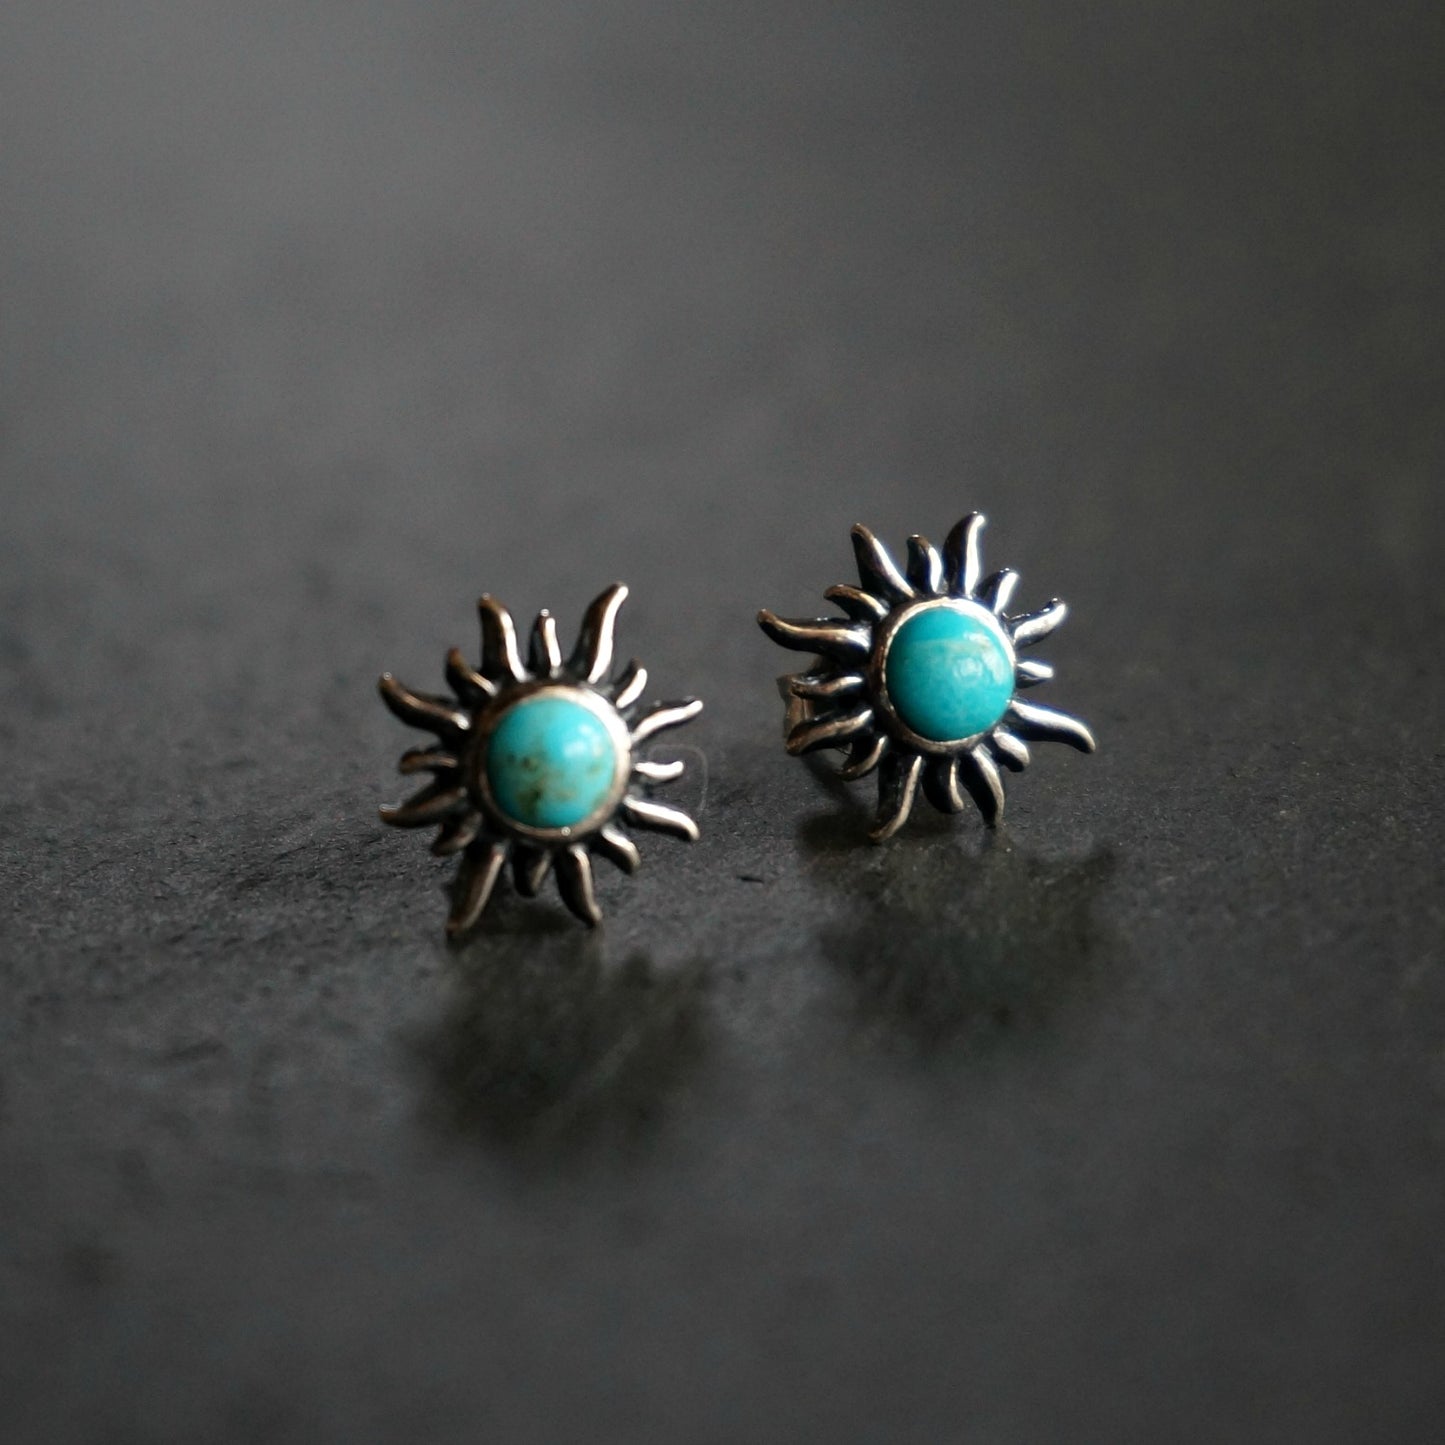 Load image into Gallery viewer, Sunburst Turquoise Earrings - SOWELL JEWELRY
